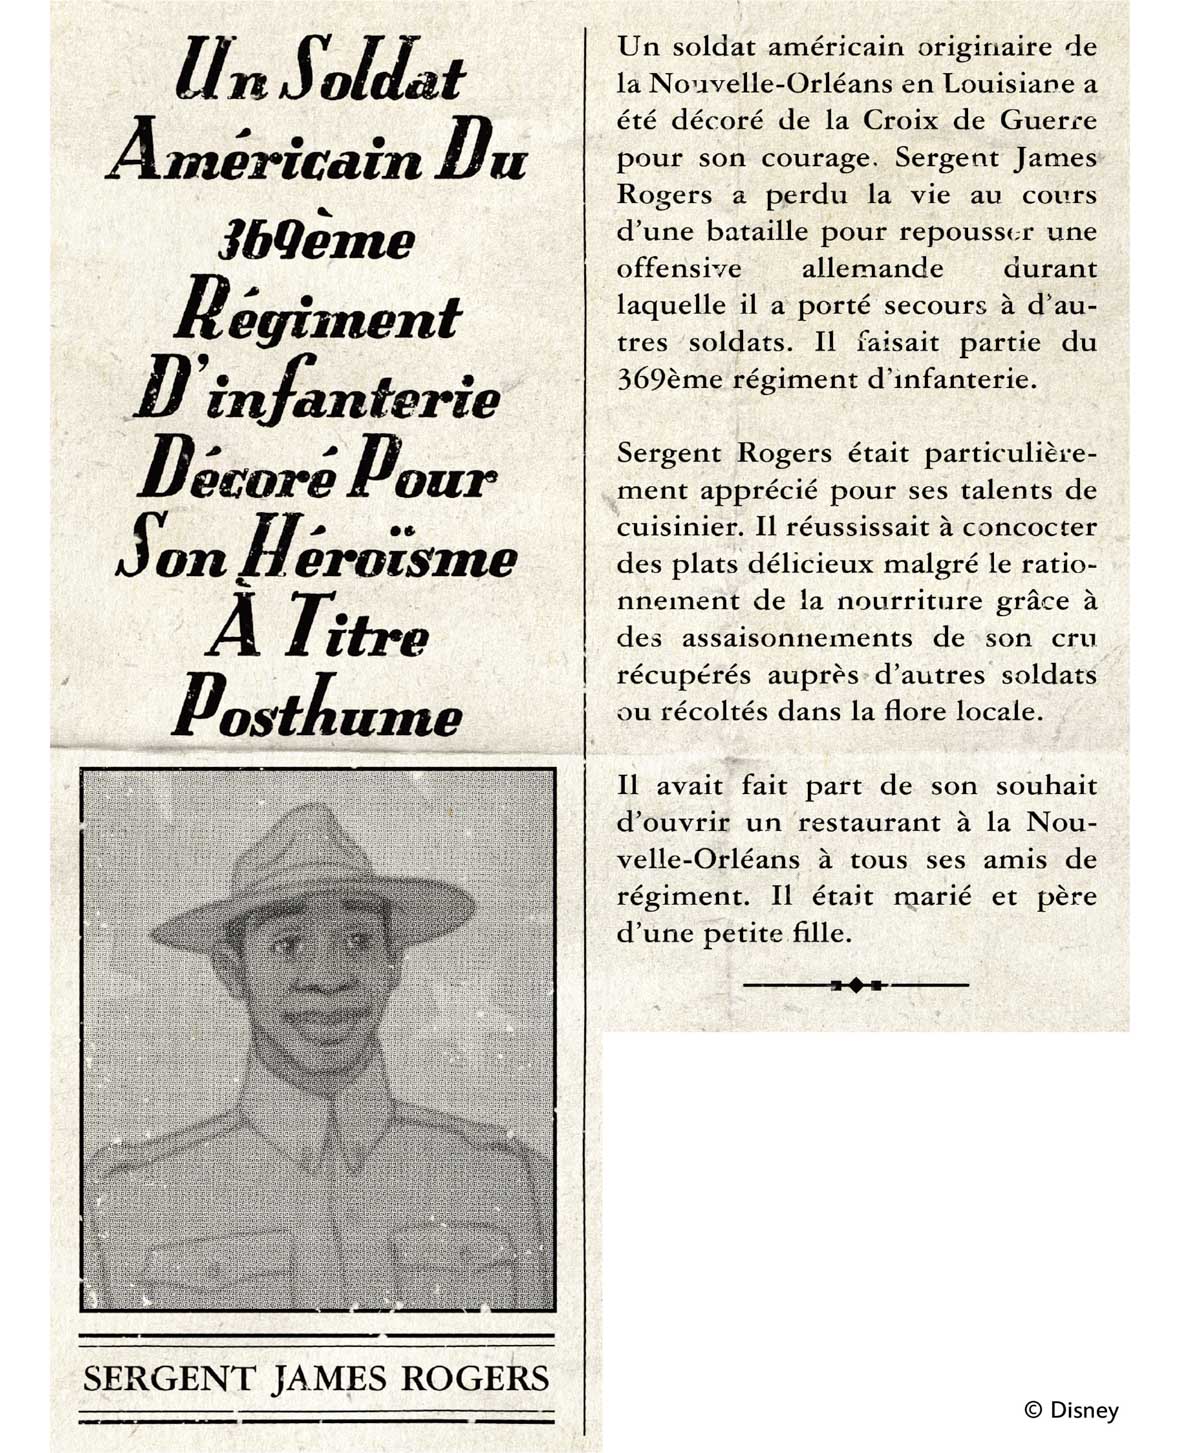 A French newspaper clipping of James Rogers